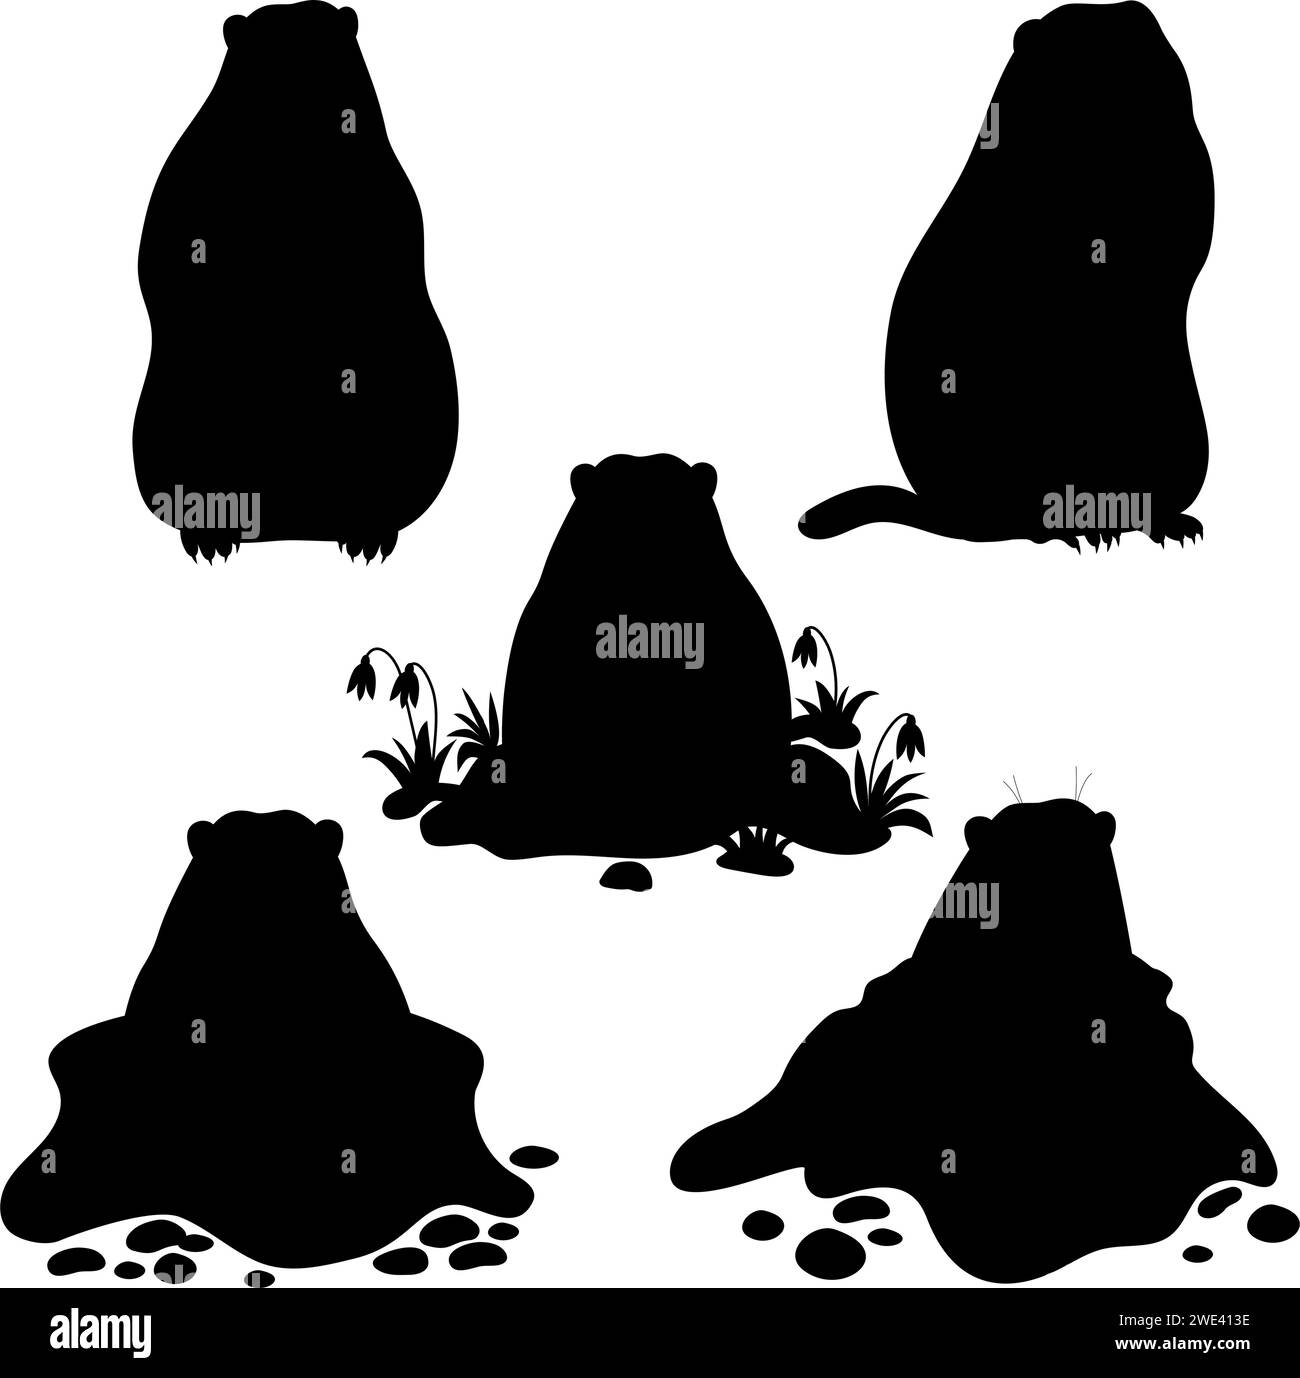 Animal marmot collection. Silhouette rodent groundhog. Isolated black hand drawn. Holiday Groundhog Day February 2. Vector illustration Stock Vector